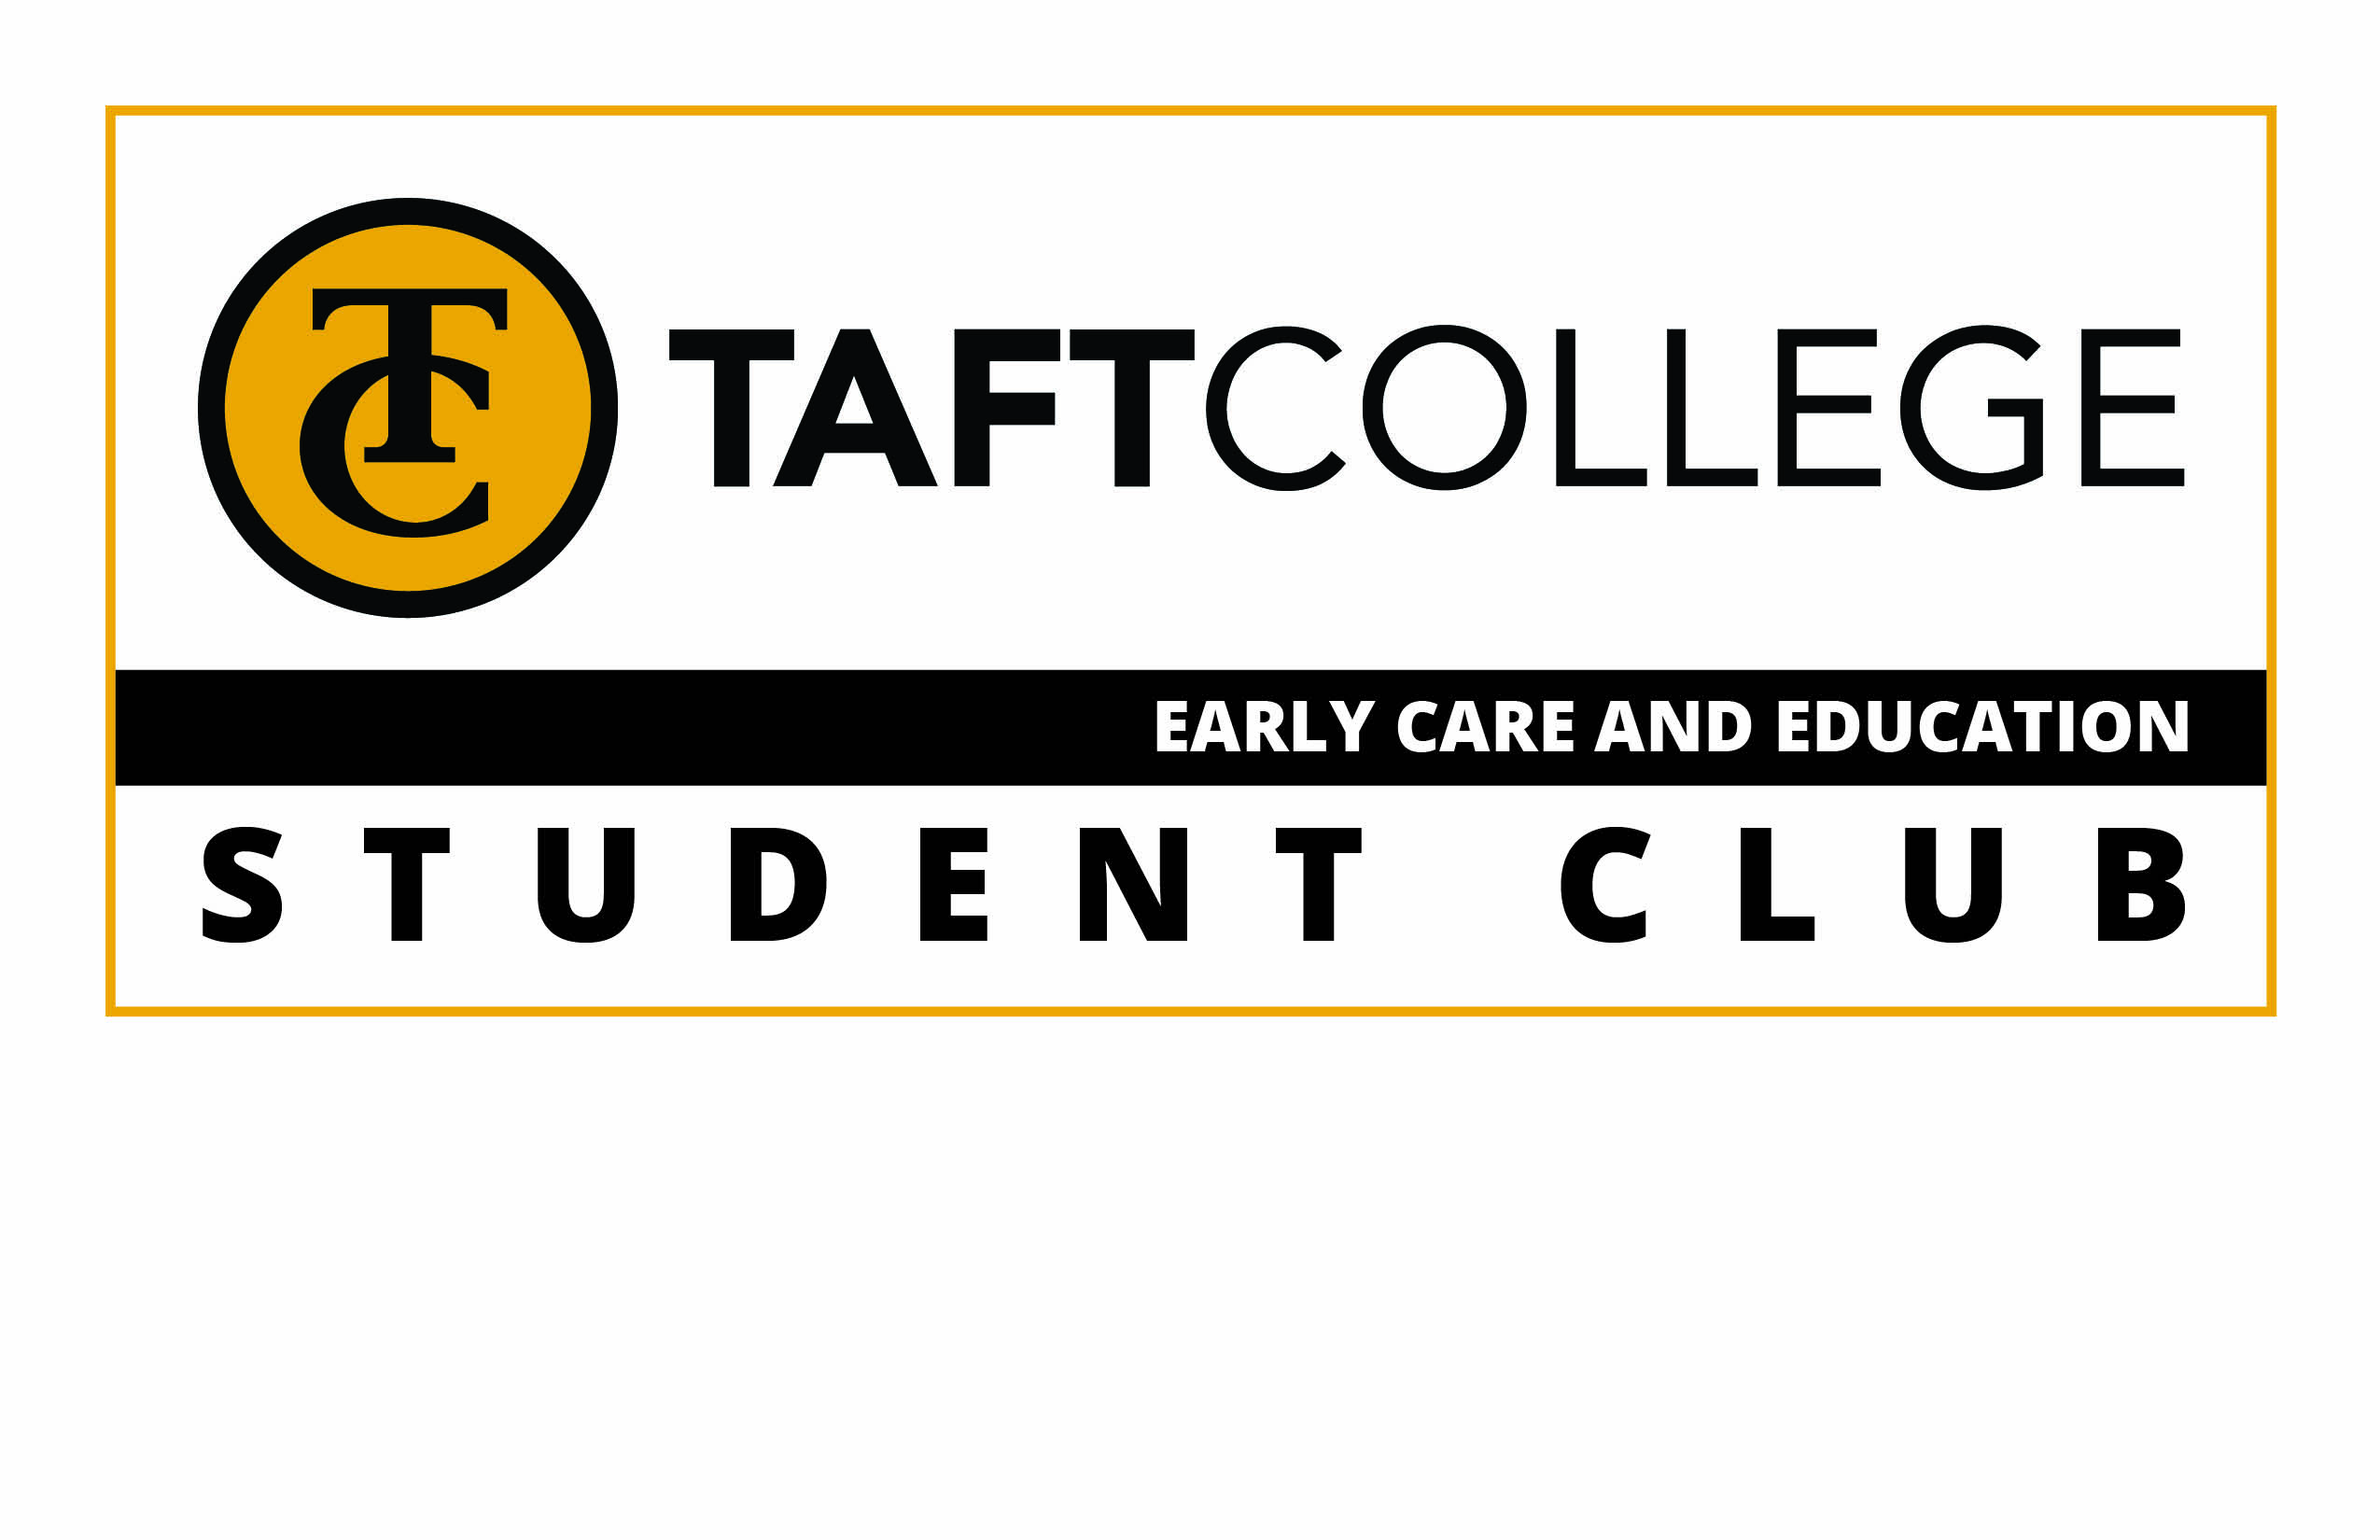 Early Care and Education Club logo